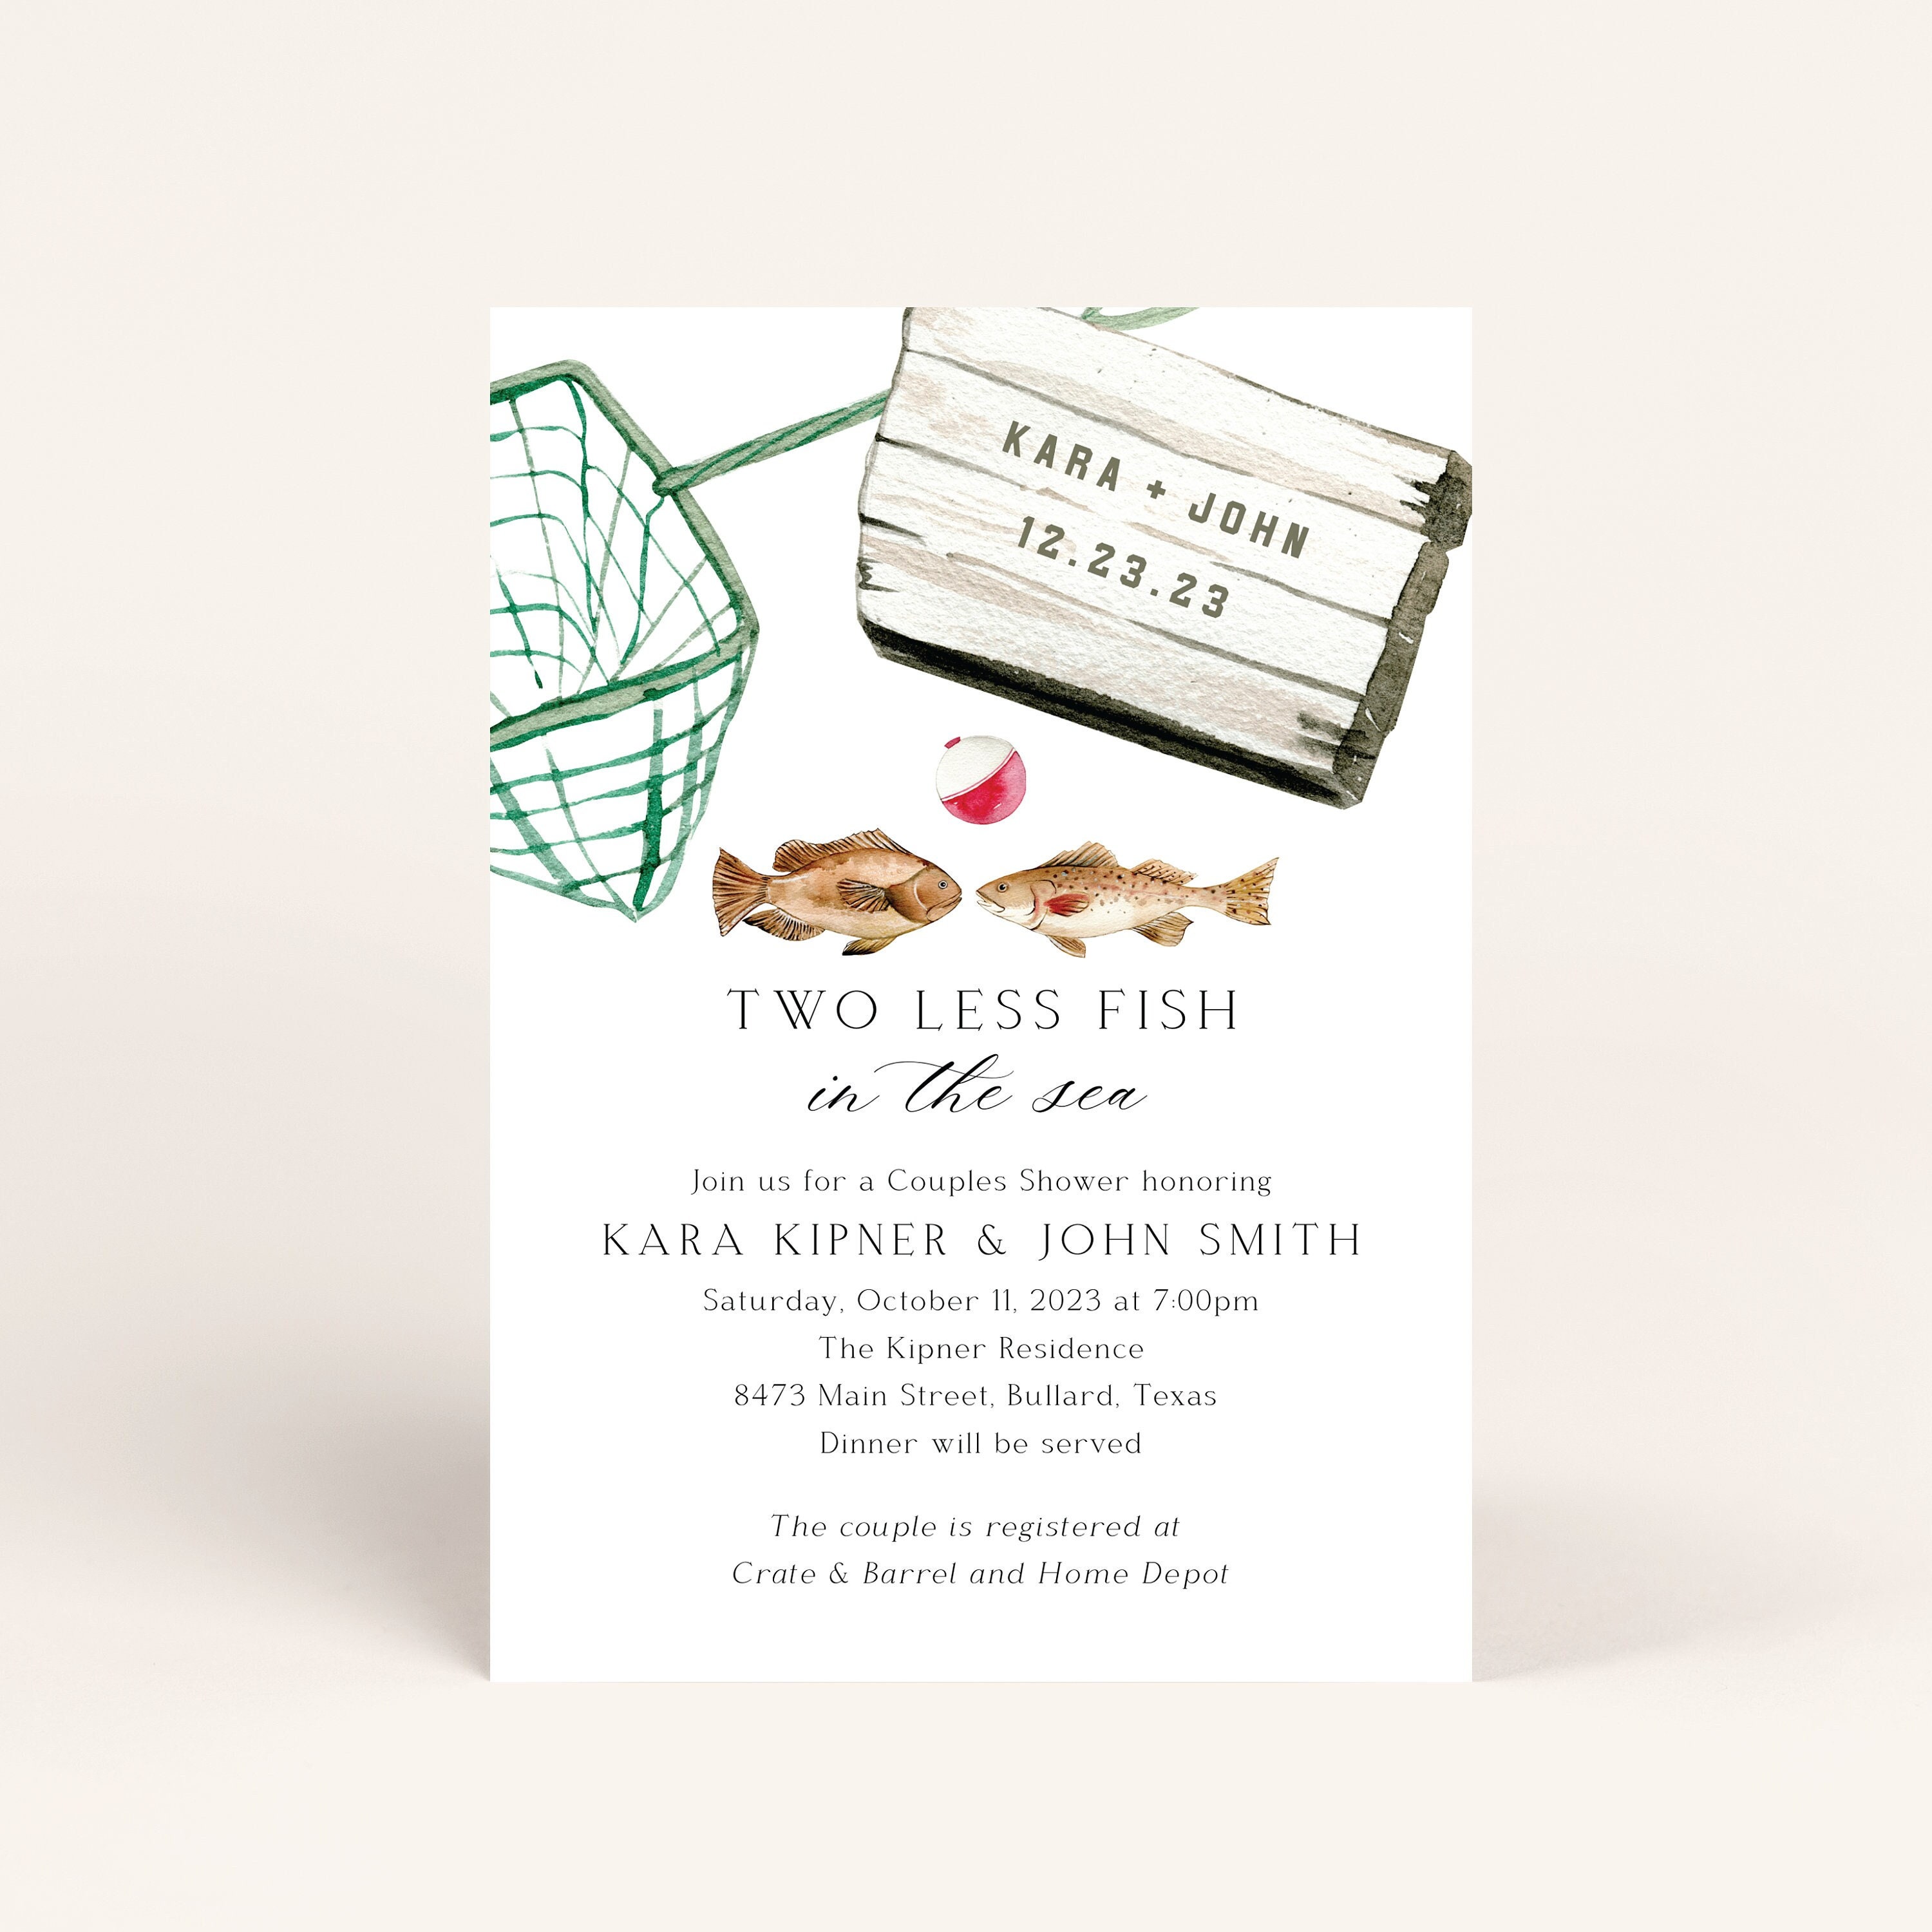 Large Bridal Shower Invitation Two Less Fish in the Sea 8.5 X 5.5